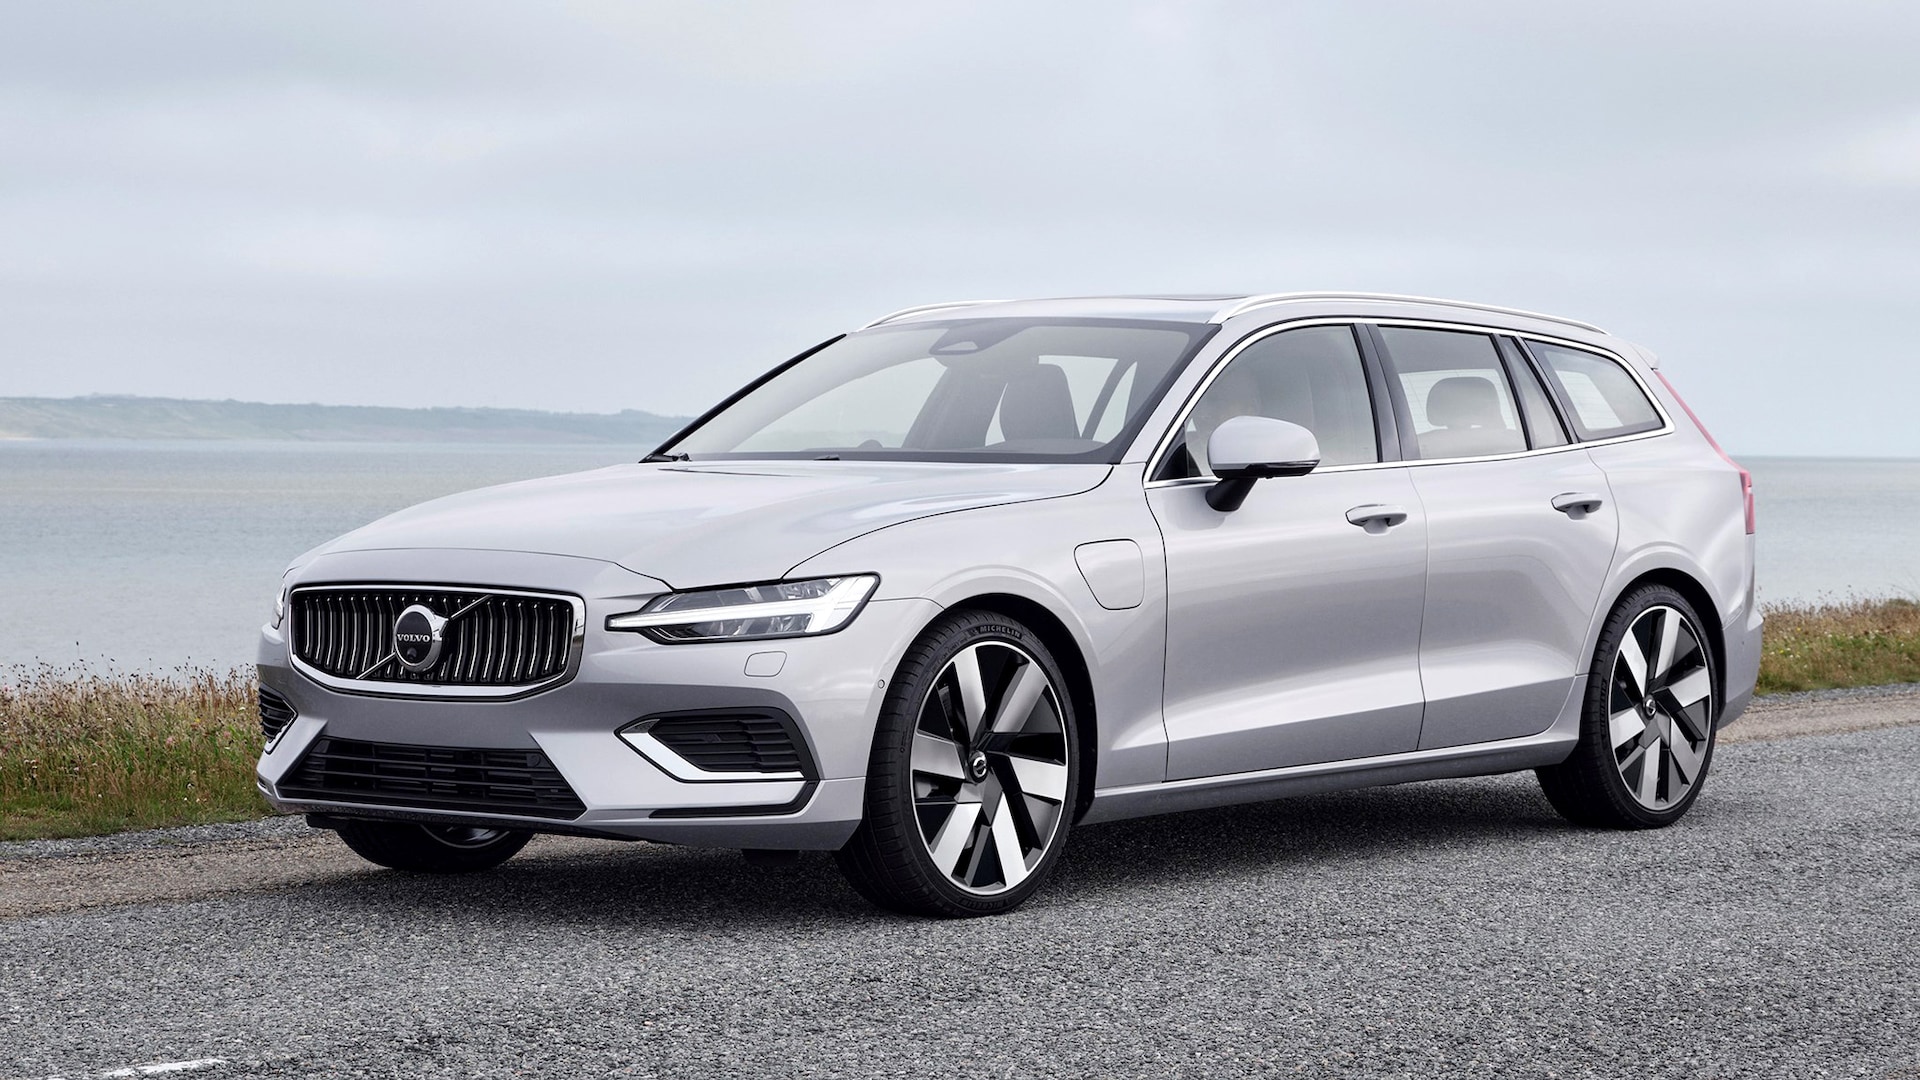 2023 Volvo V60 Prices, Reviews, and Photos - MotorTrend